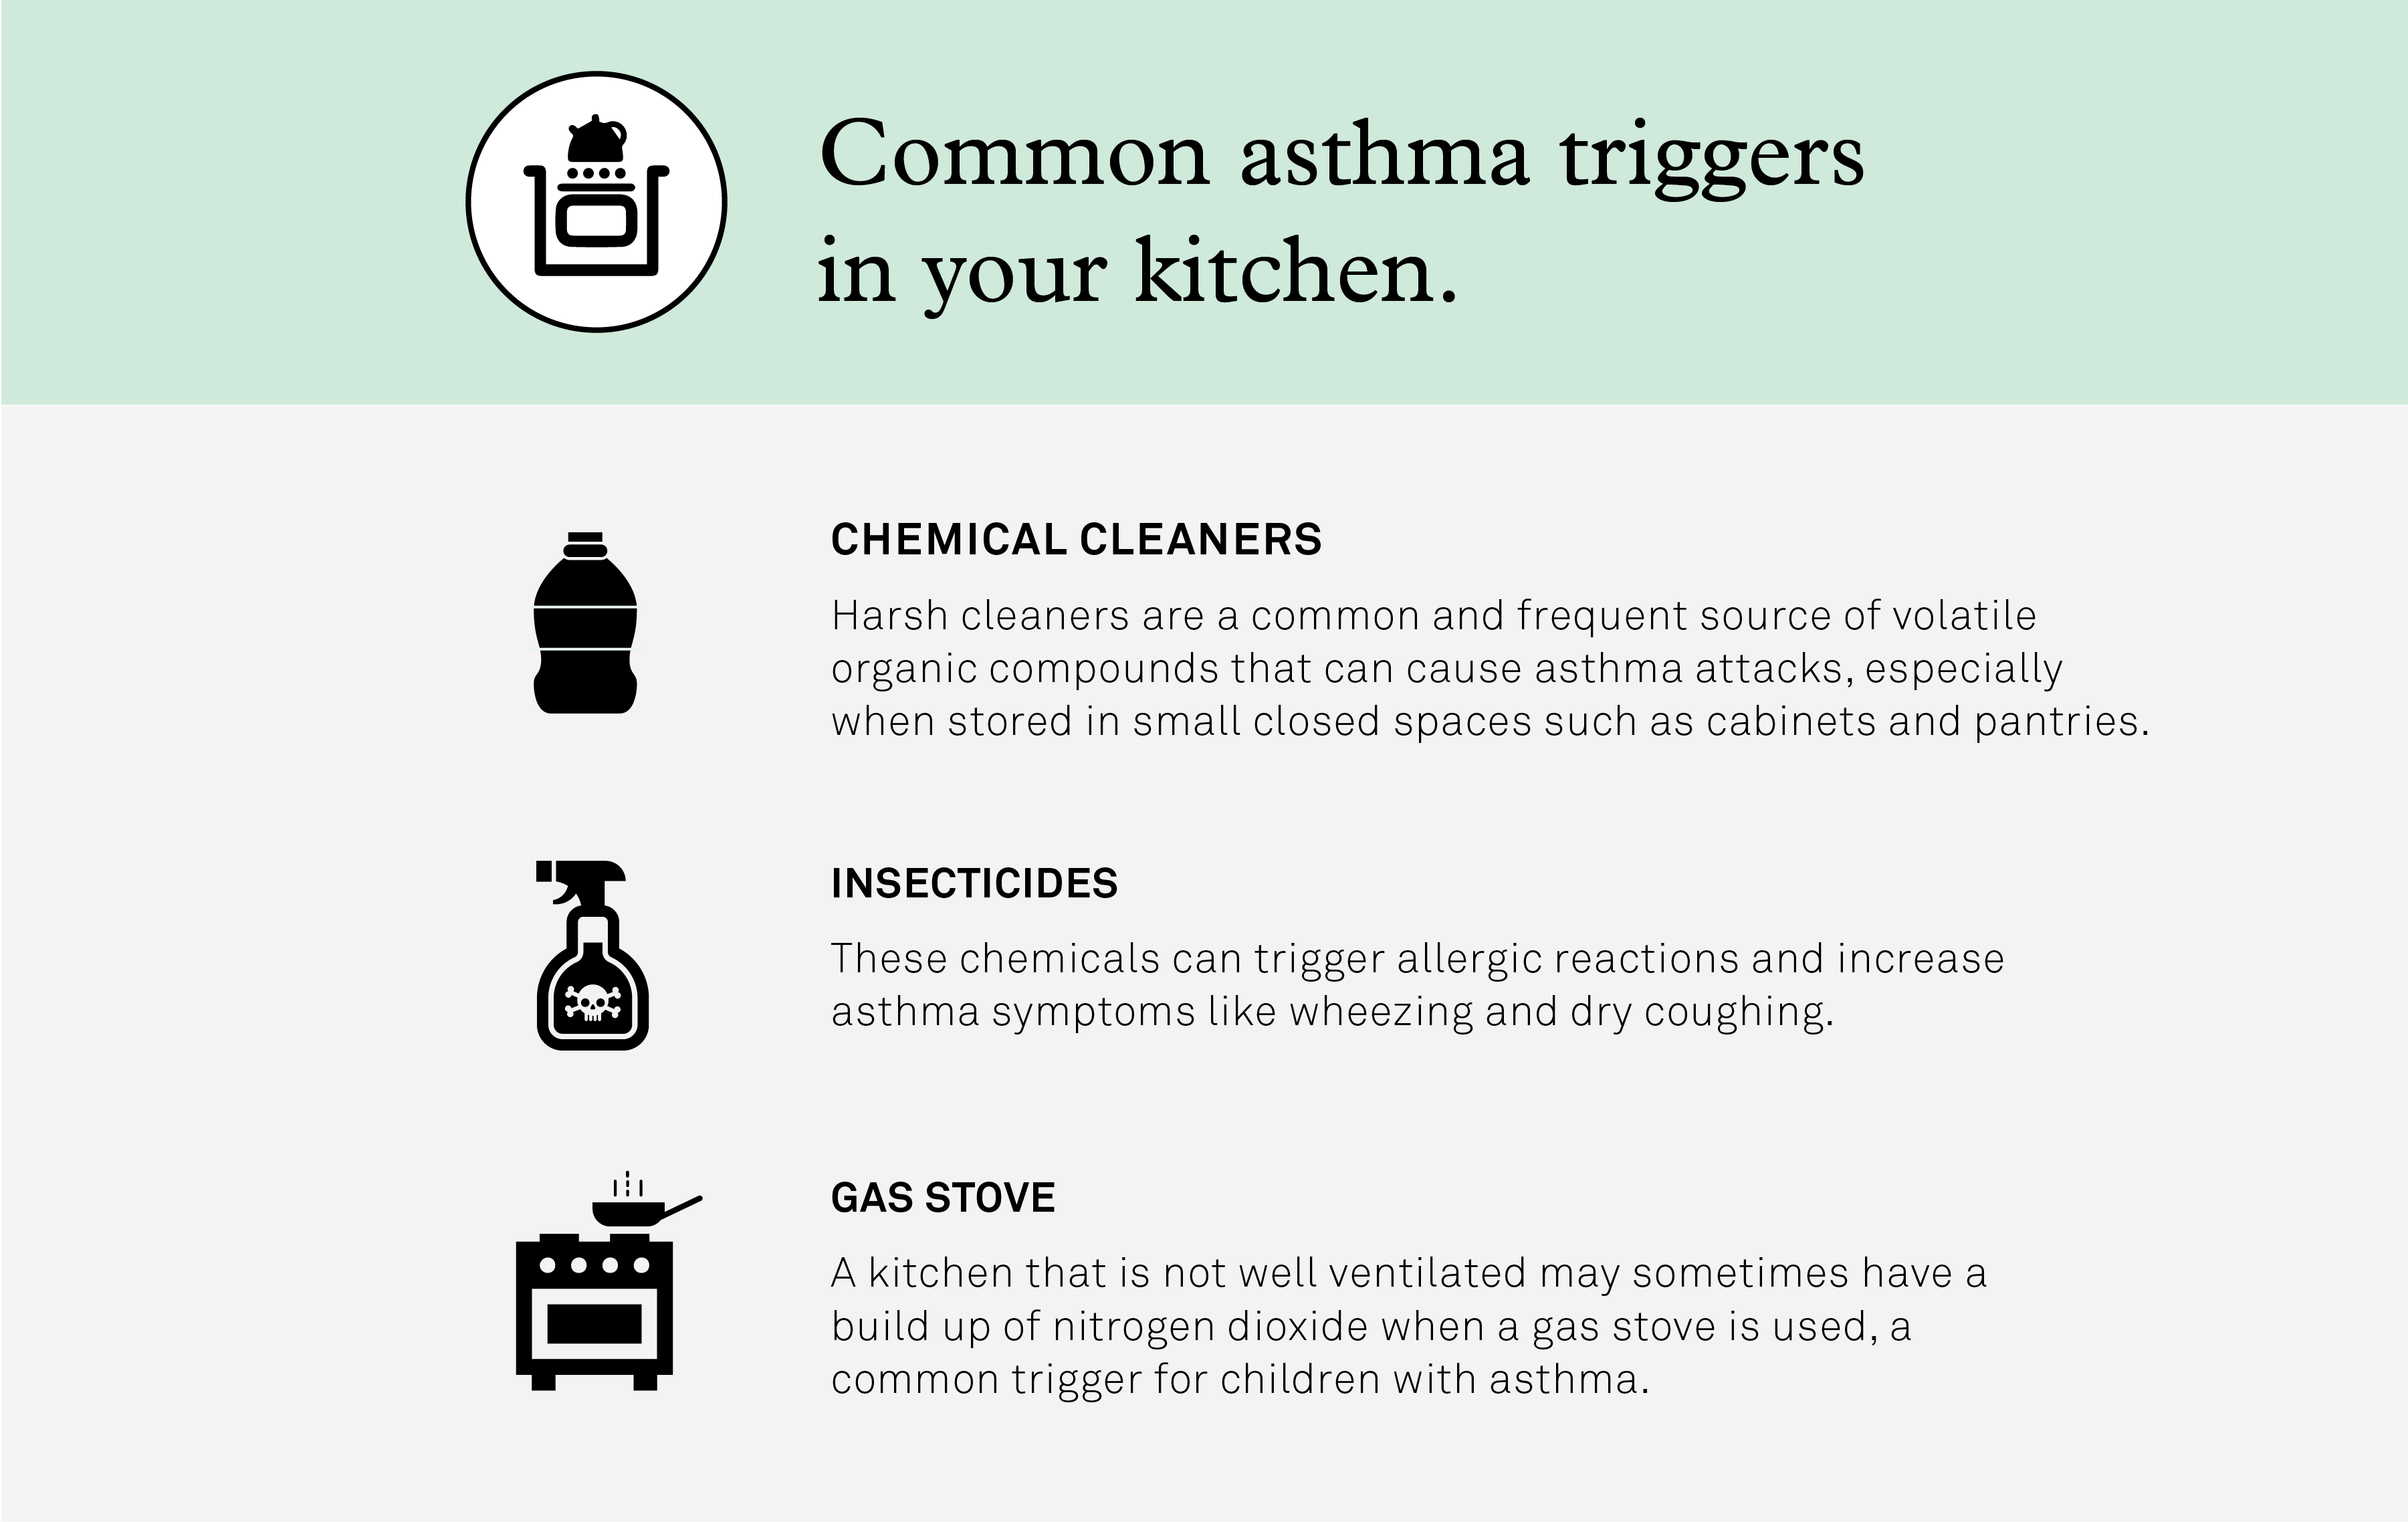 Asthma Triggers in Kitchen